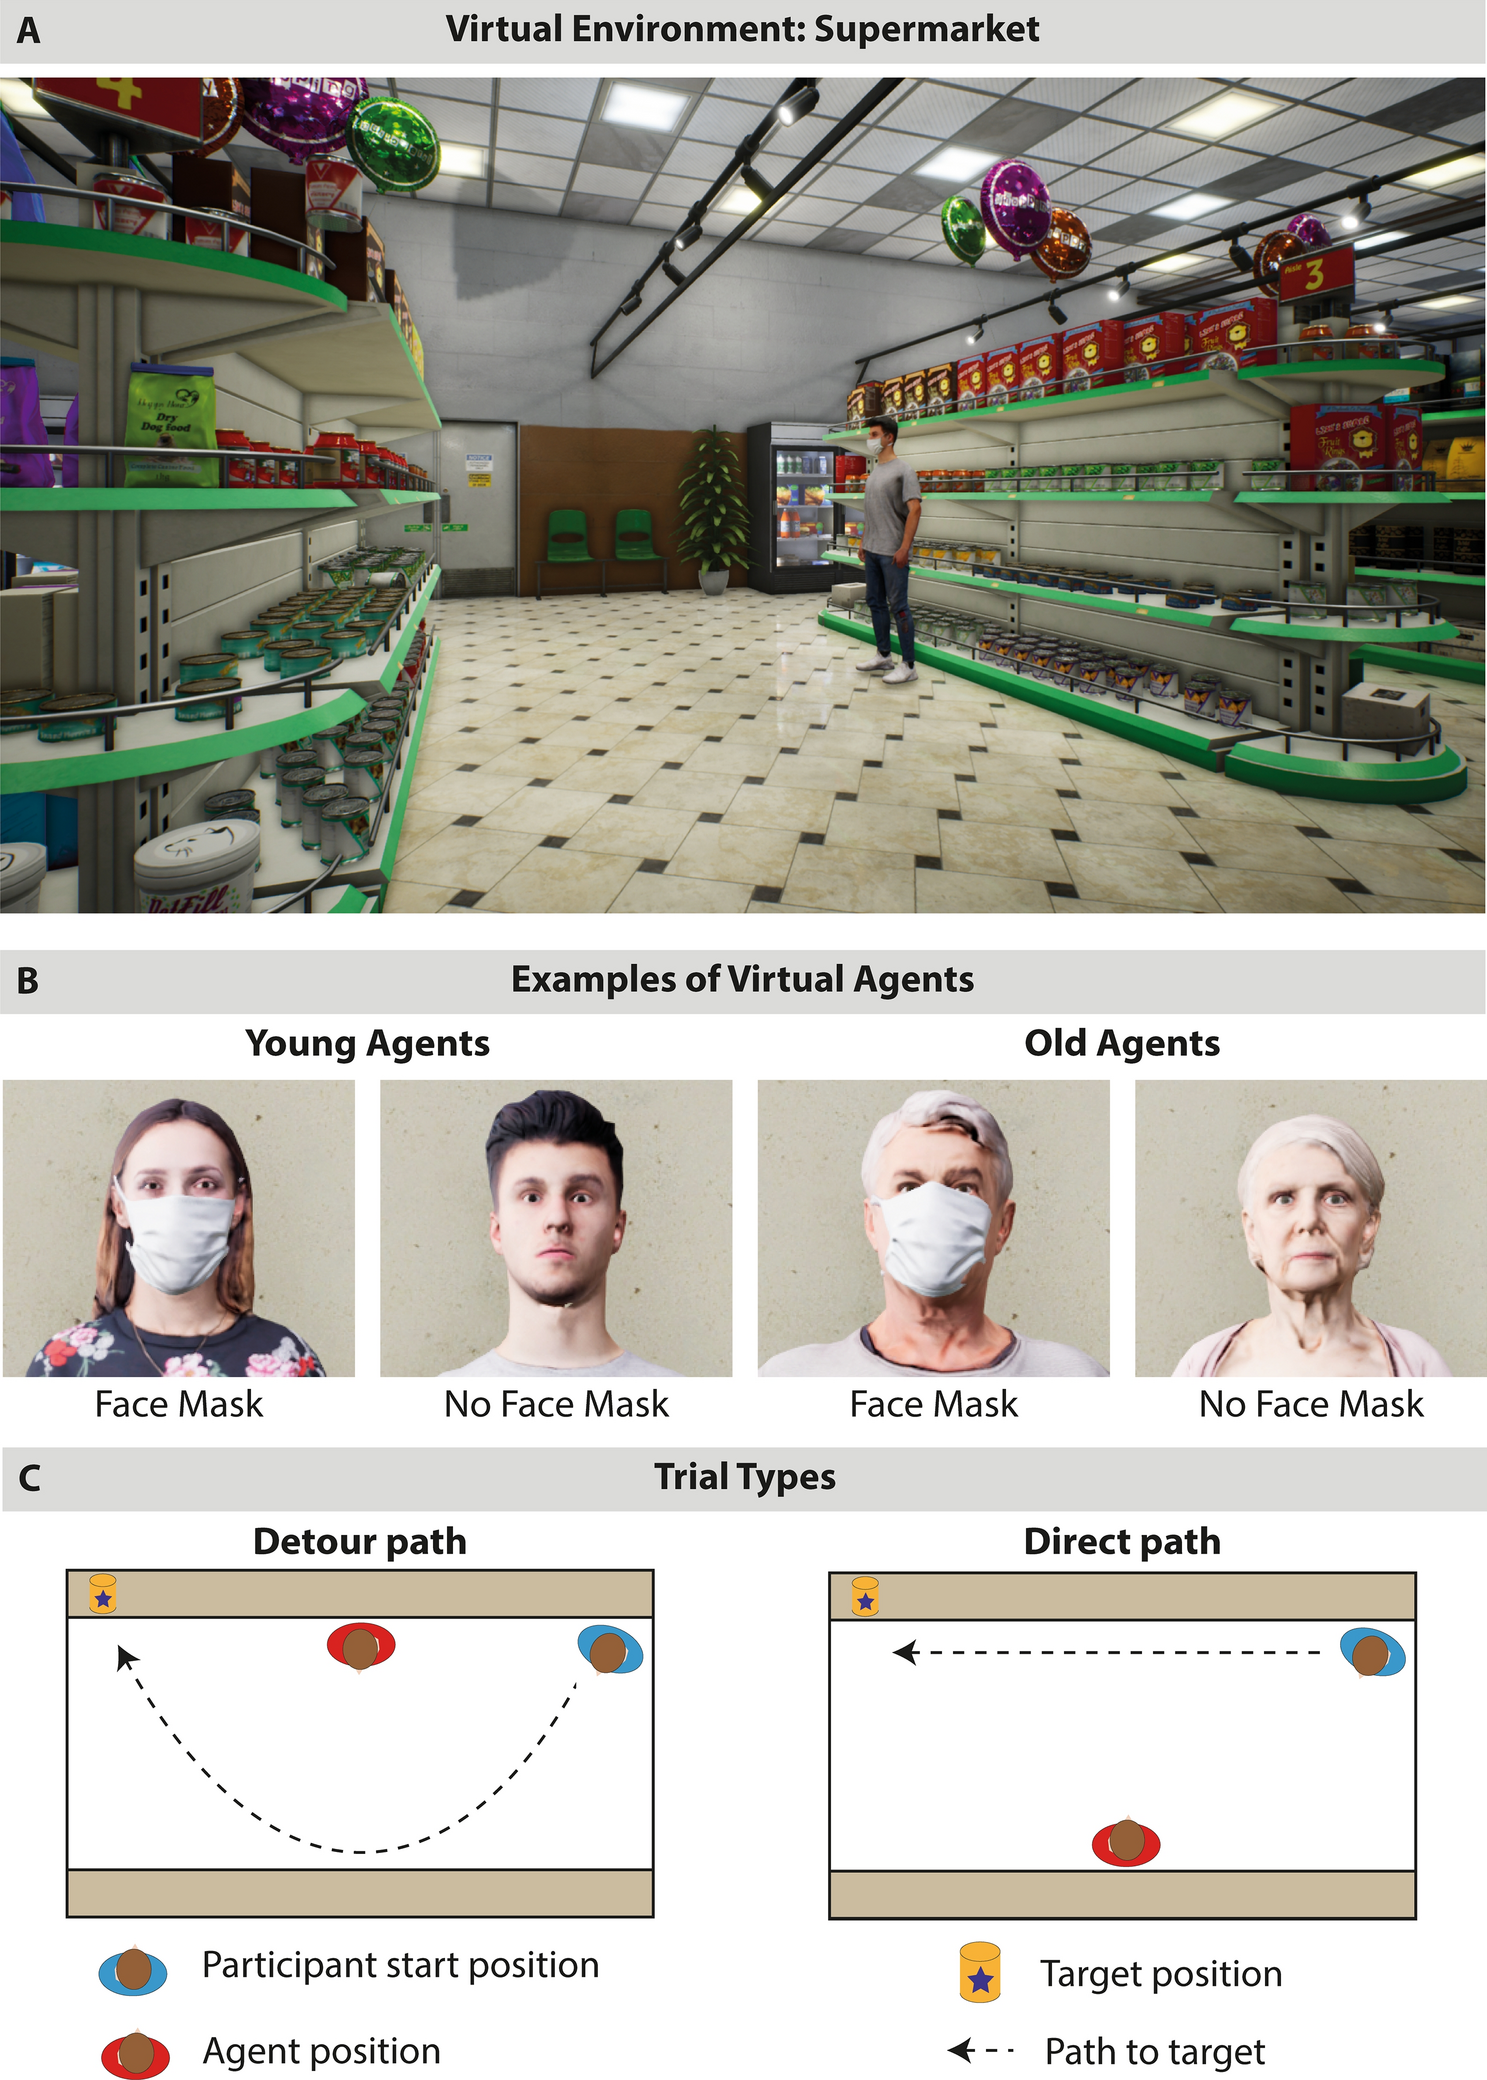 Face masks reduce interpersonal distance in virtual reality Scientific Reports